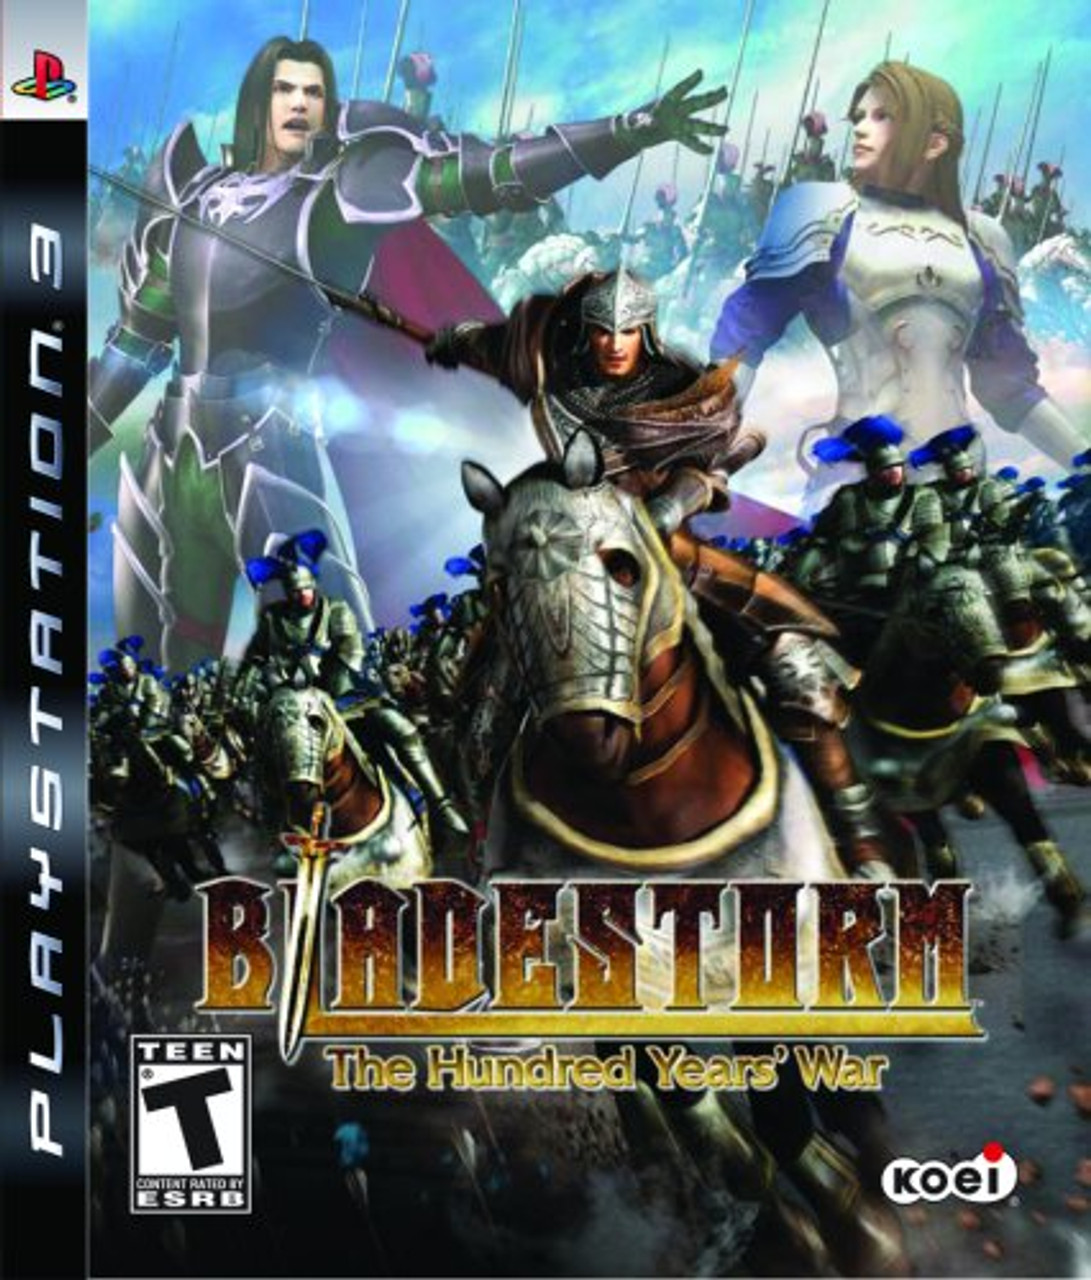 BLADESTORM THE HUNDRED YEARS WAR - PS3